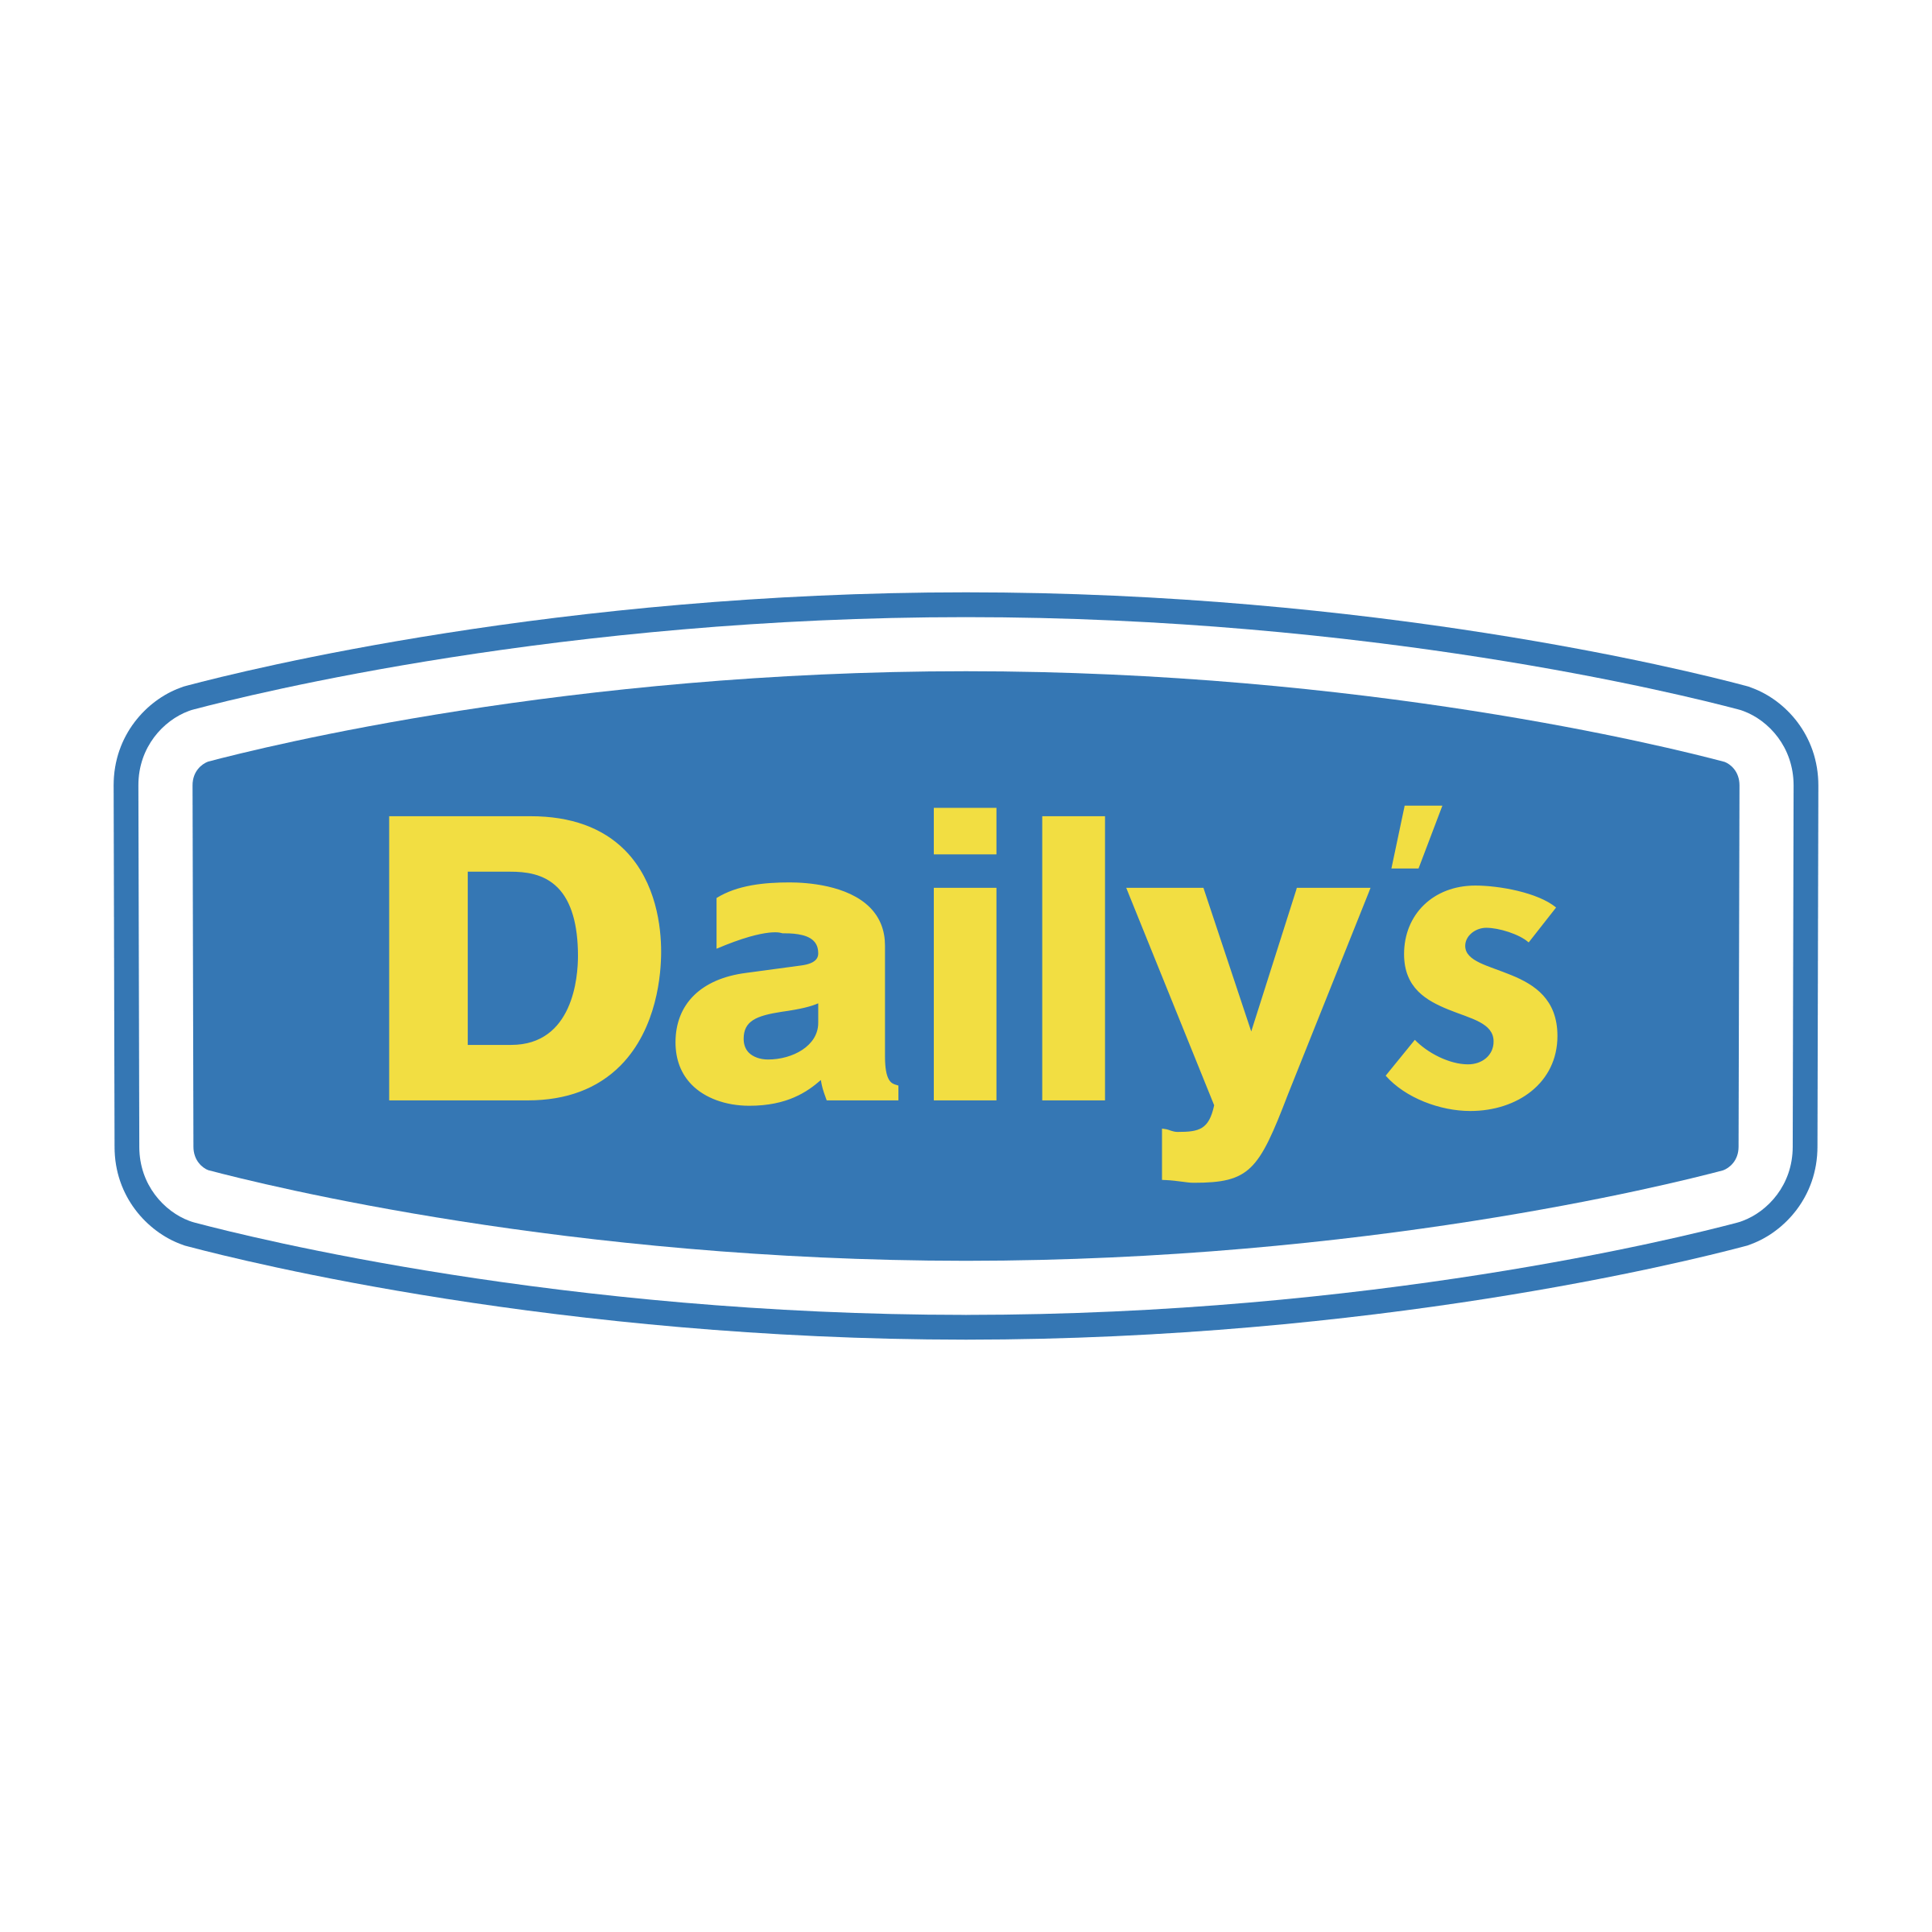 Daily's Logo - Daily's Logo PNG Transparent & SVG Vector - Freebie Supply